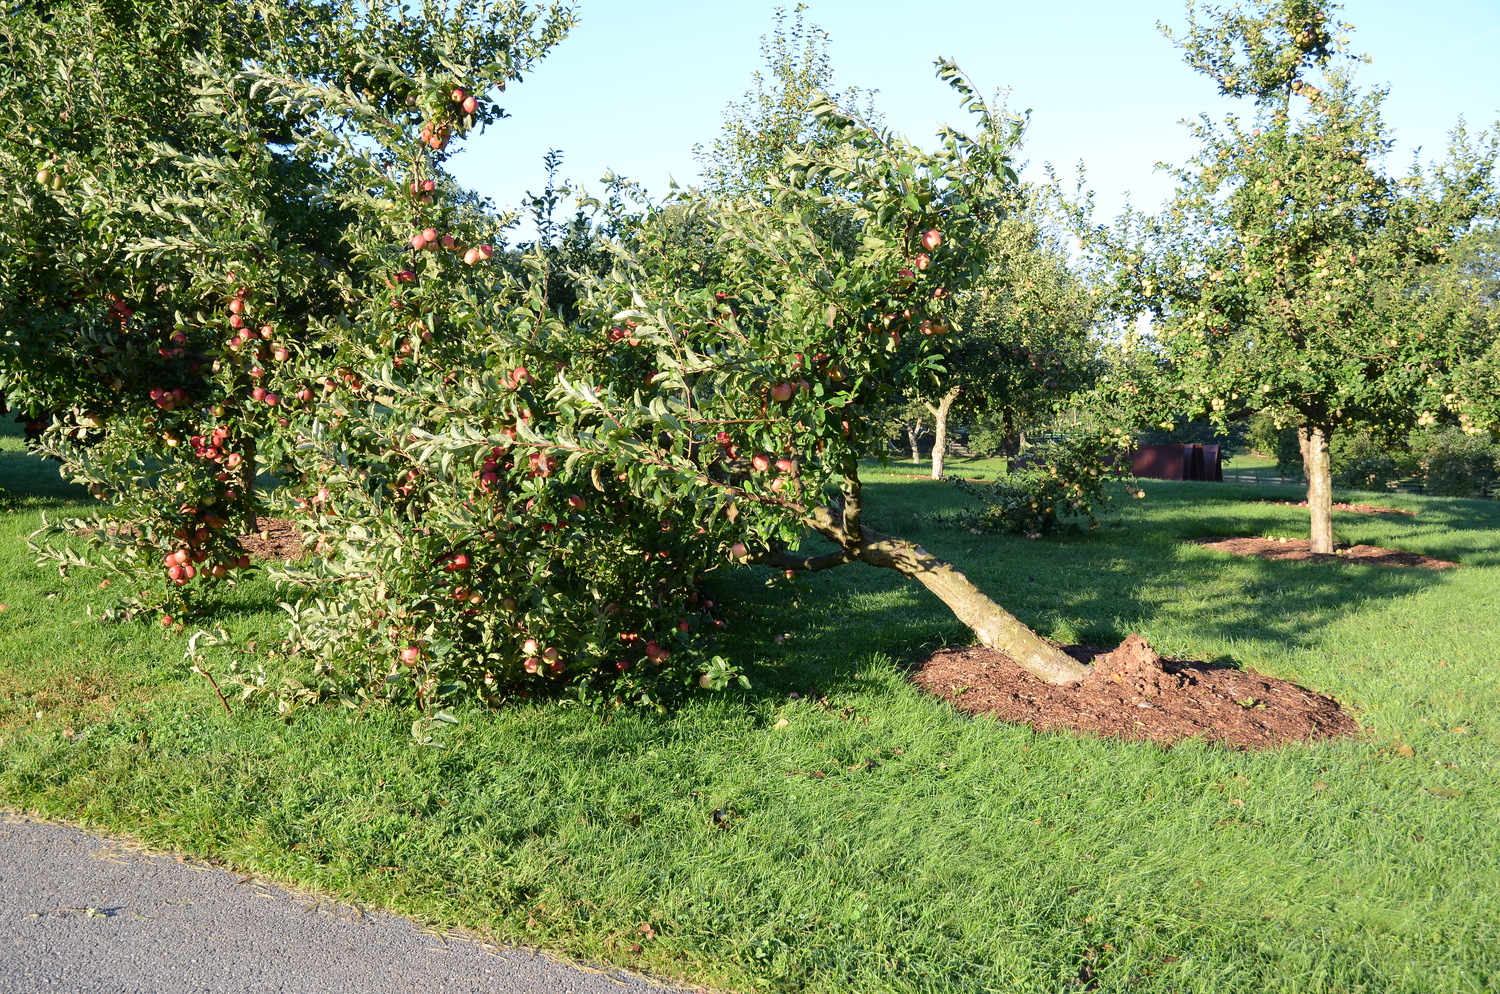 This downed apple tree was rescued from the Boscobel garden in Westchester and moved to a Westchester estate along with 100 other similar apple and pear trees more than 25 years ago. In spite of appearing to be well, an overnight windstorm blew the tree down. The tree was righted, staked and continues to fruit and thrive in the same location. The pruning on these trees isn’t great but all continue to fruit, produce incredible cider every year and feed plenty of deer. ANDREW MESSINGER